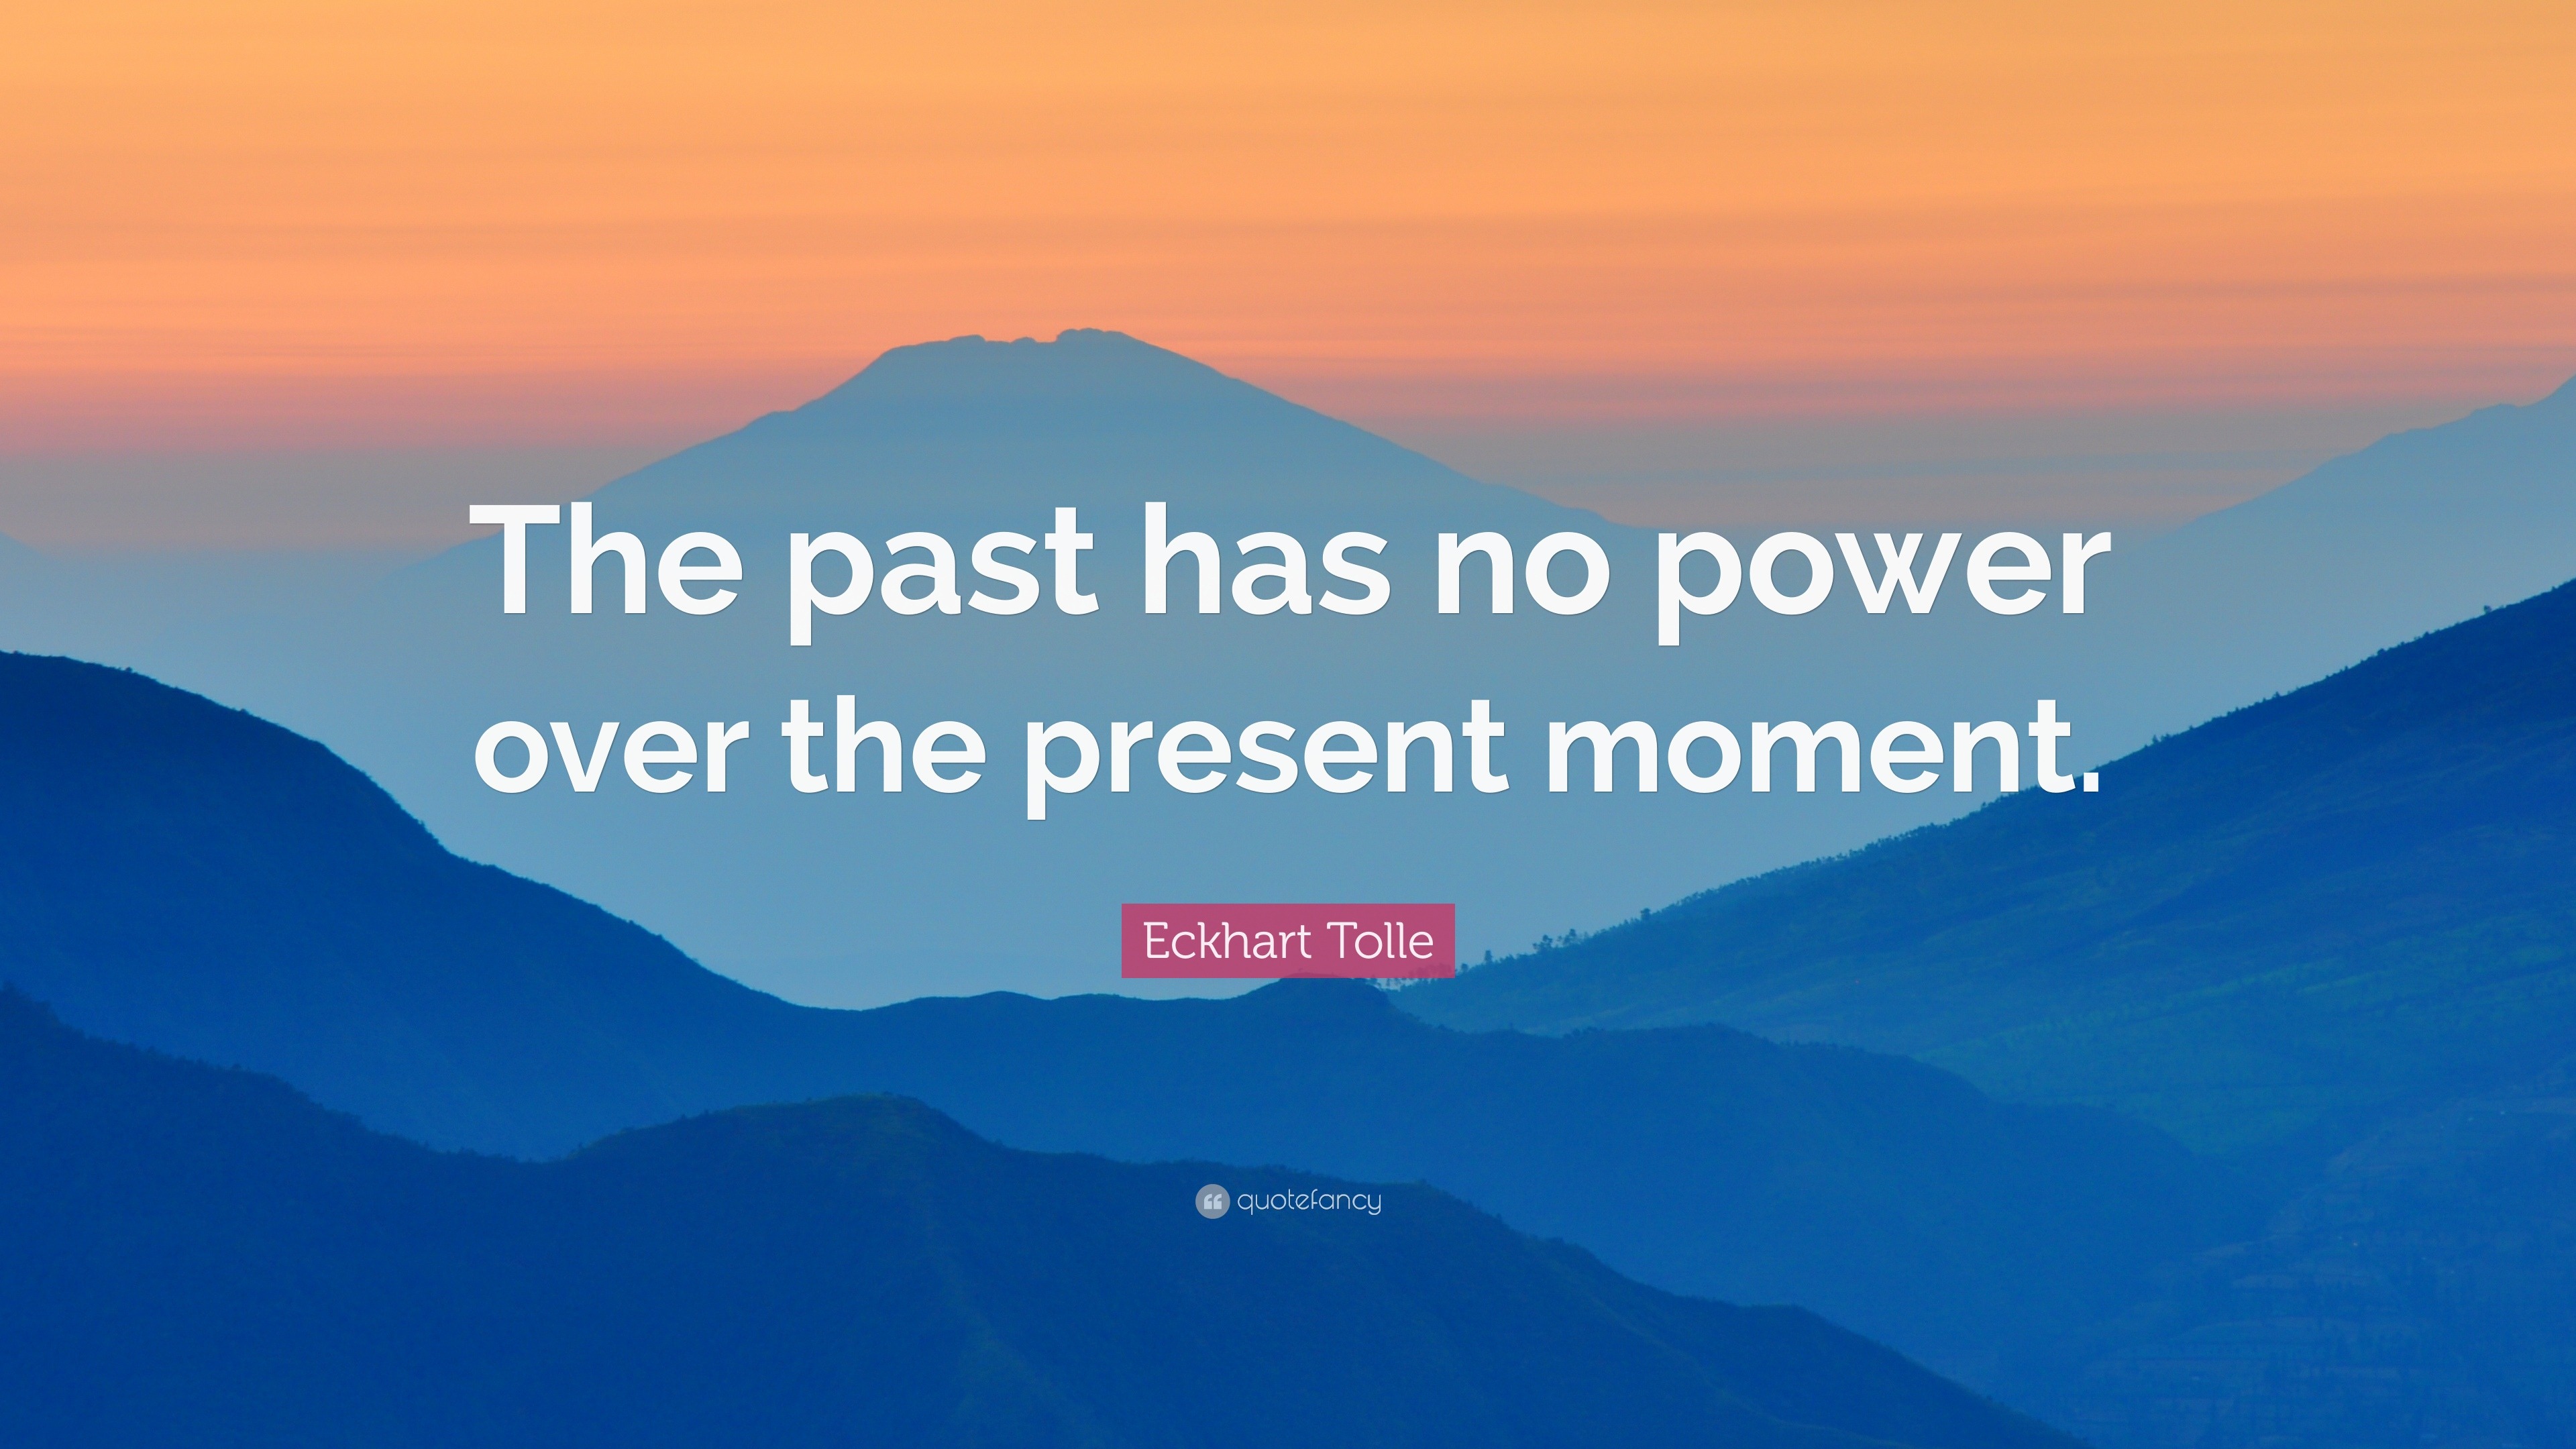 Eckhart Tolle Quote: “The past has no power over the present moment ...